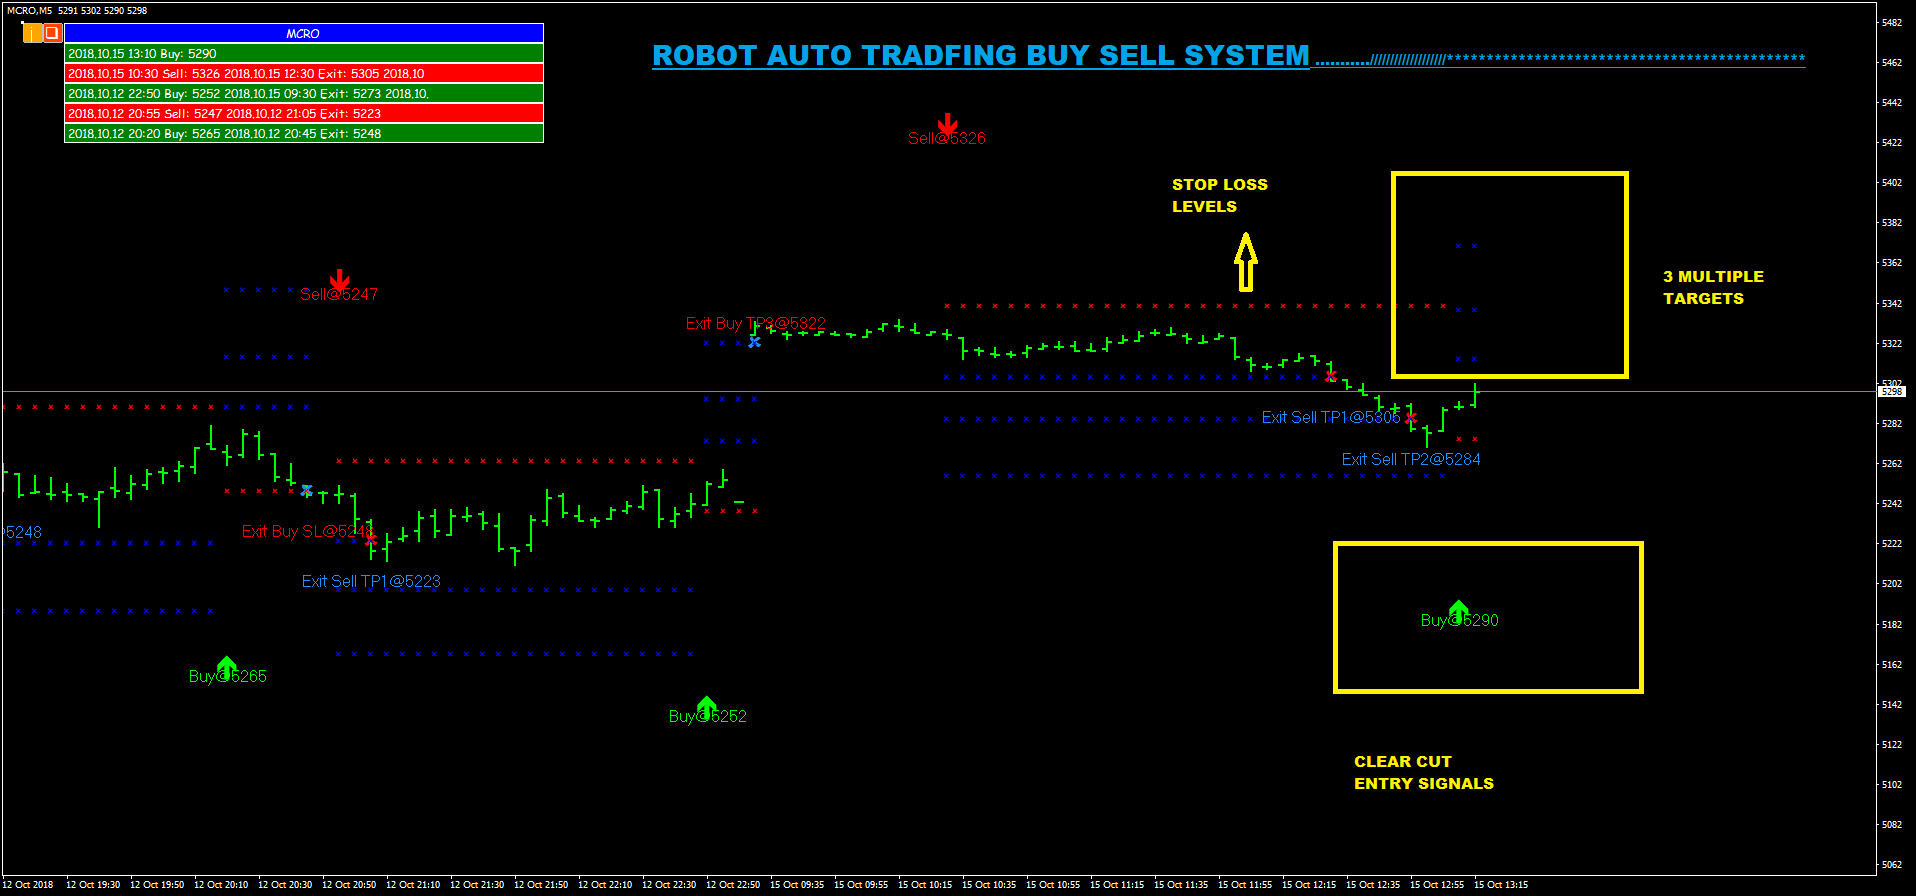 See This Report on Intraday Trading Strategies